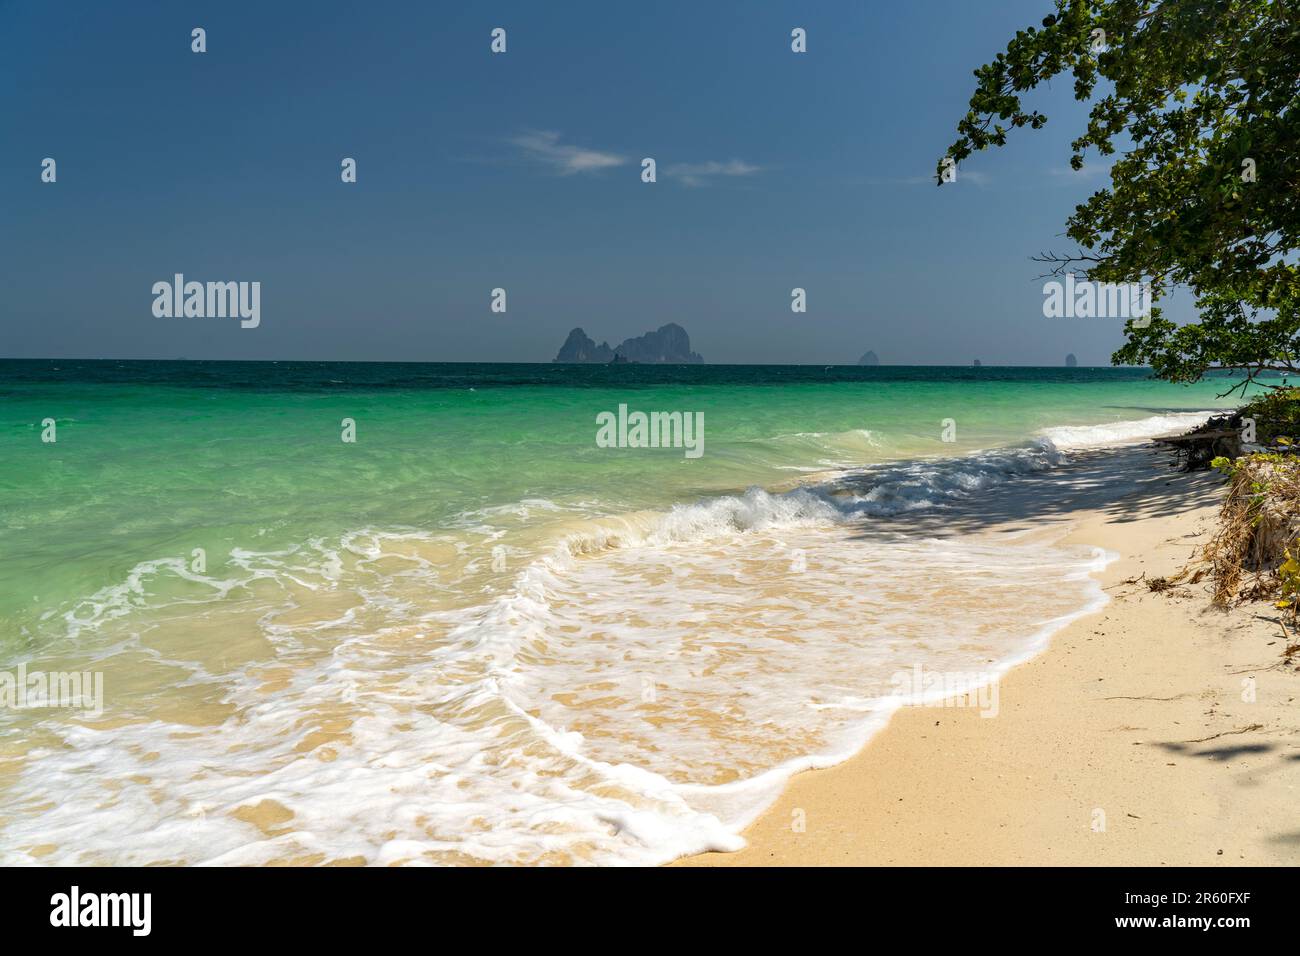 Am Strand der Insel Koh Lao Liang, Thailand, Asien   |  The beach of Ko Lao Liang islands, Thailand, Asia Stock Photo